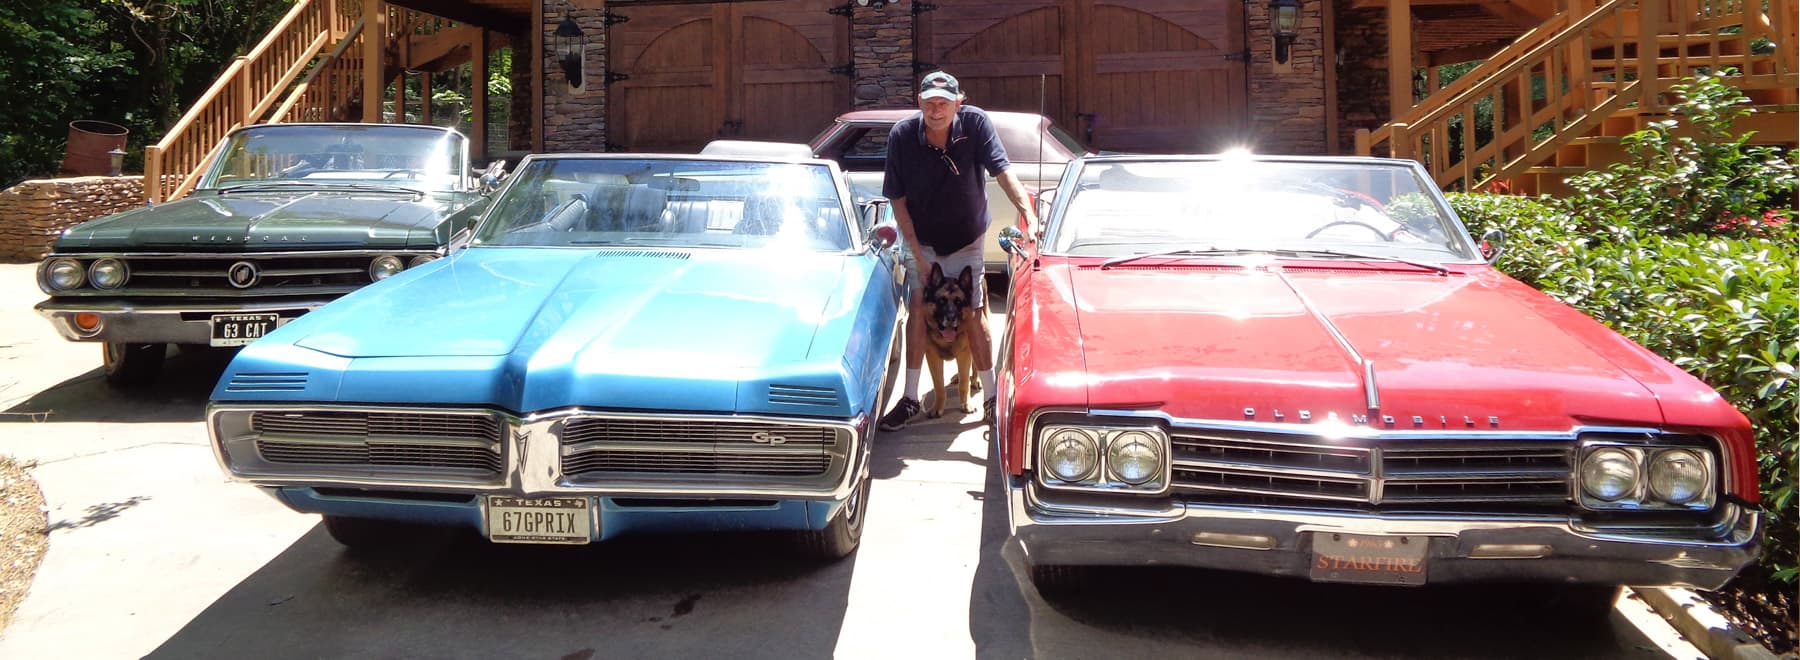 Dr Lyle Zardiackas at home in Texas with his classic cars